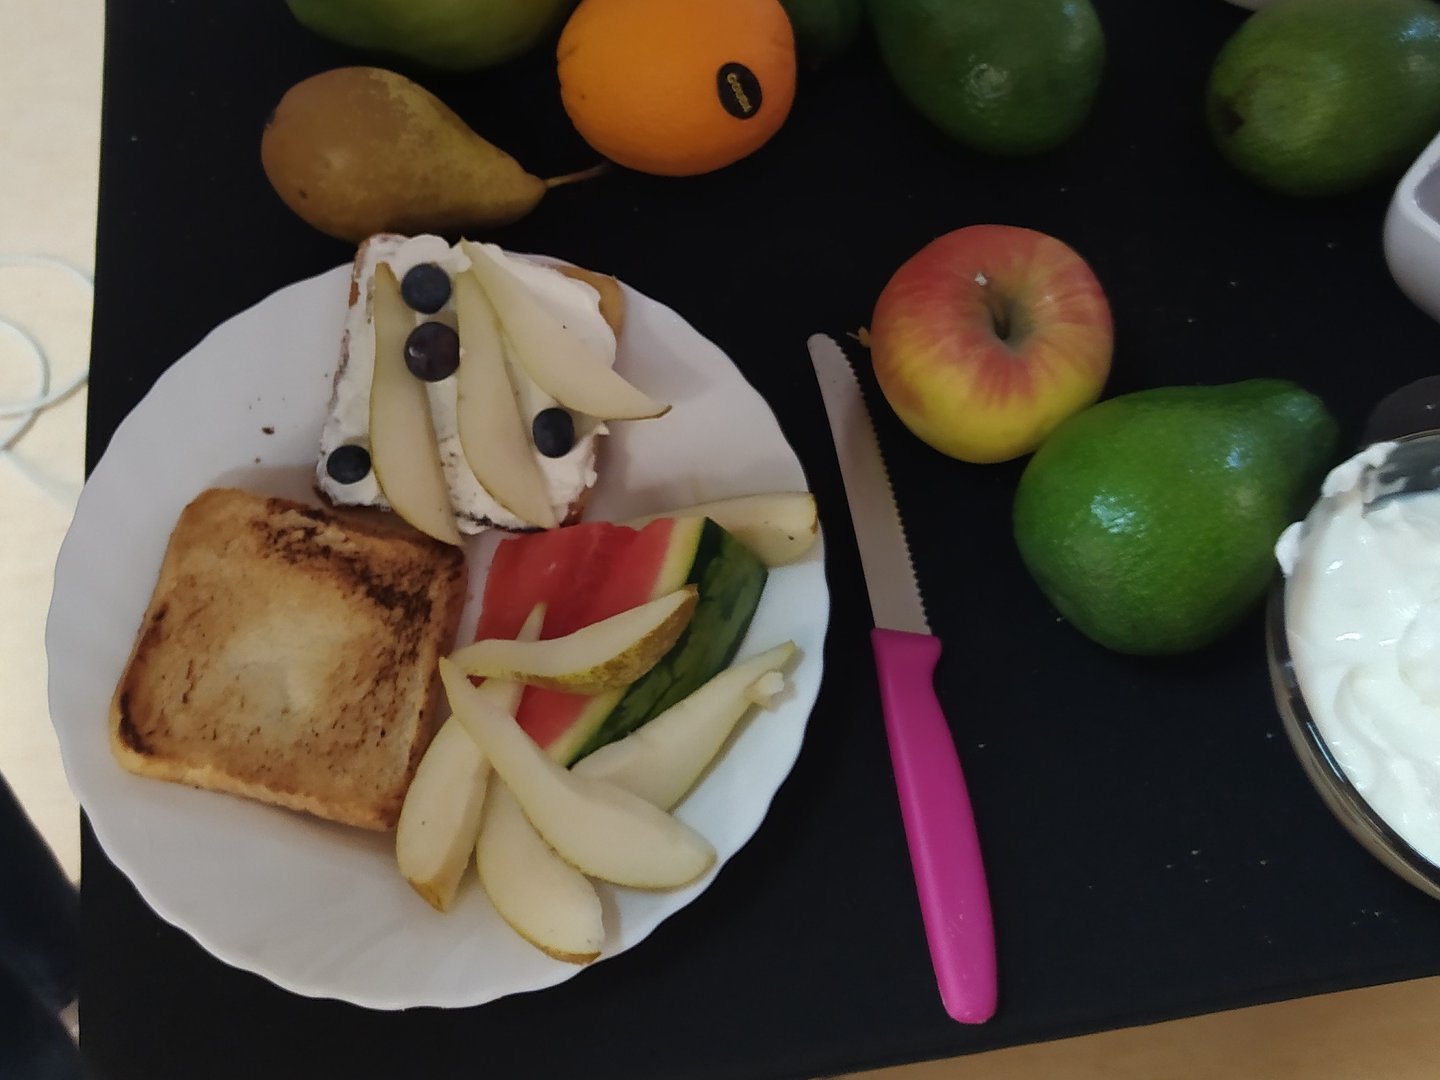 Prepared plate with fruits and bread.